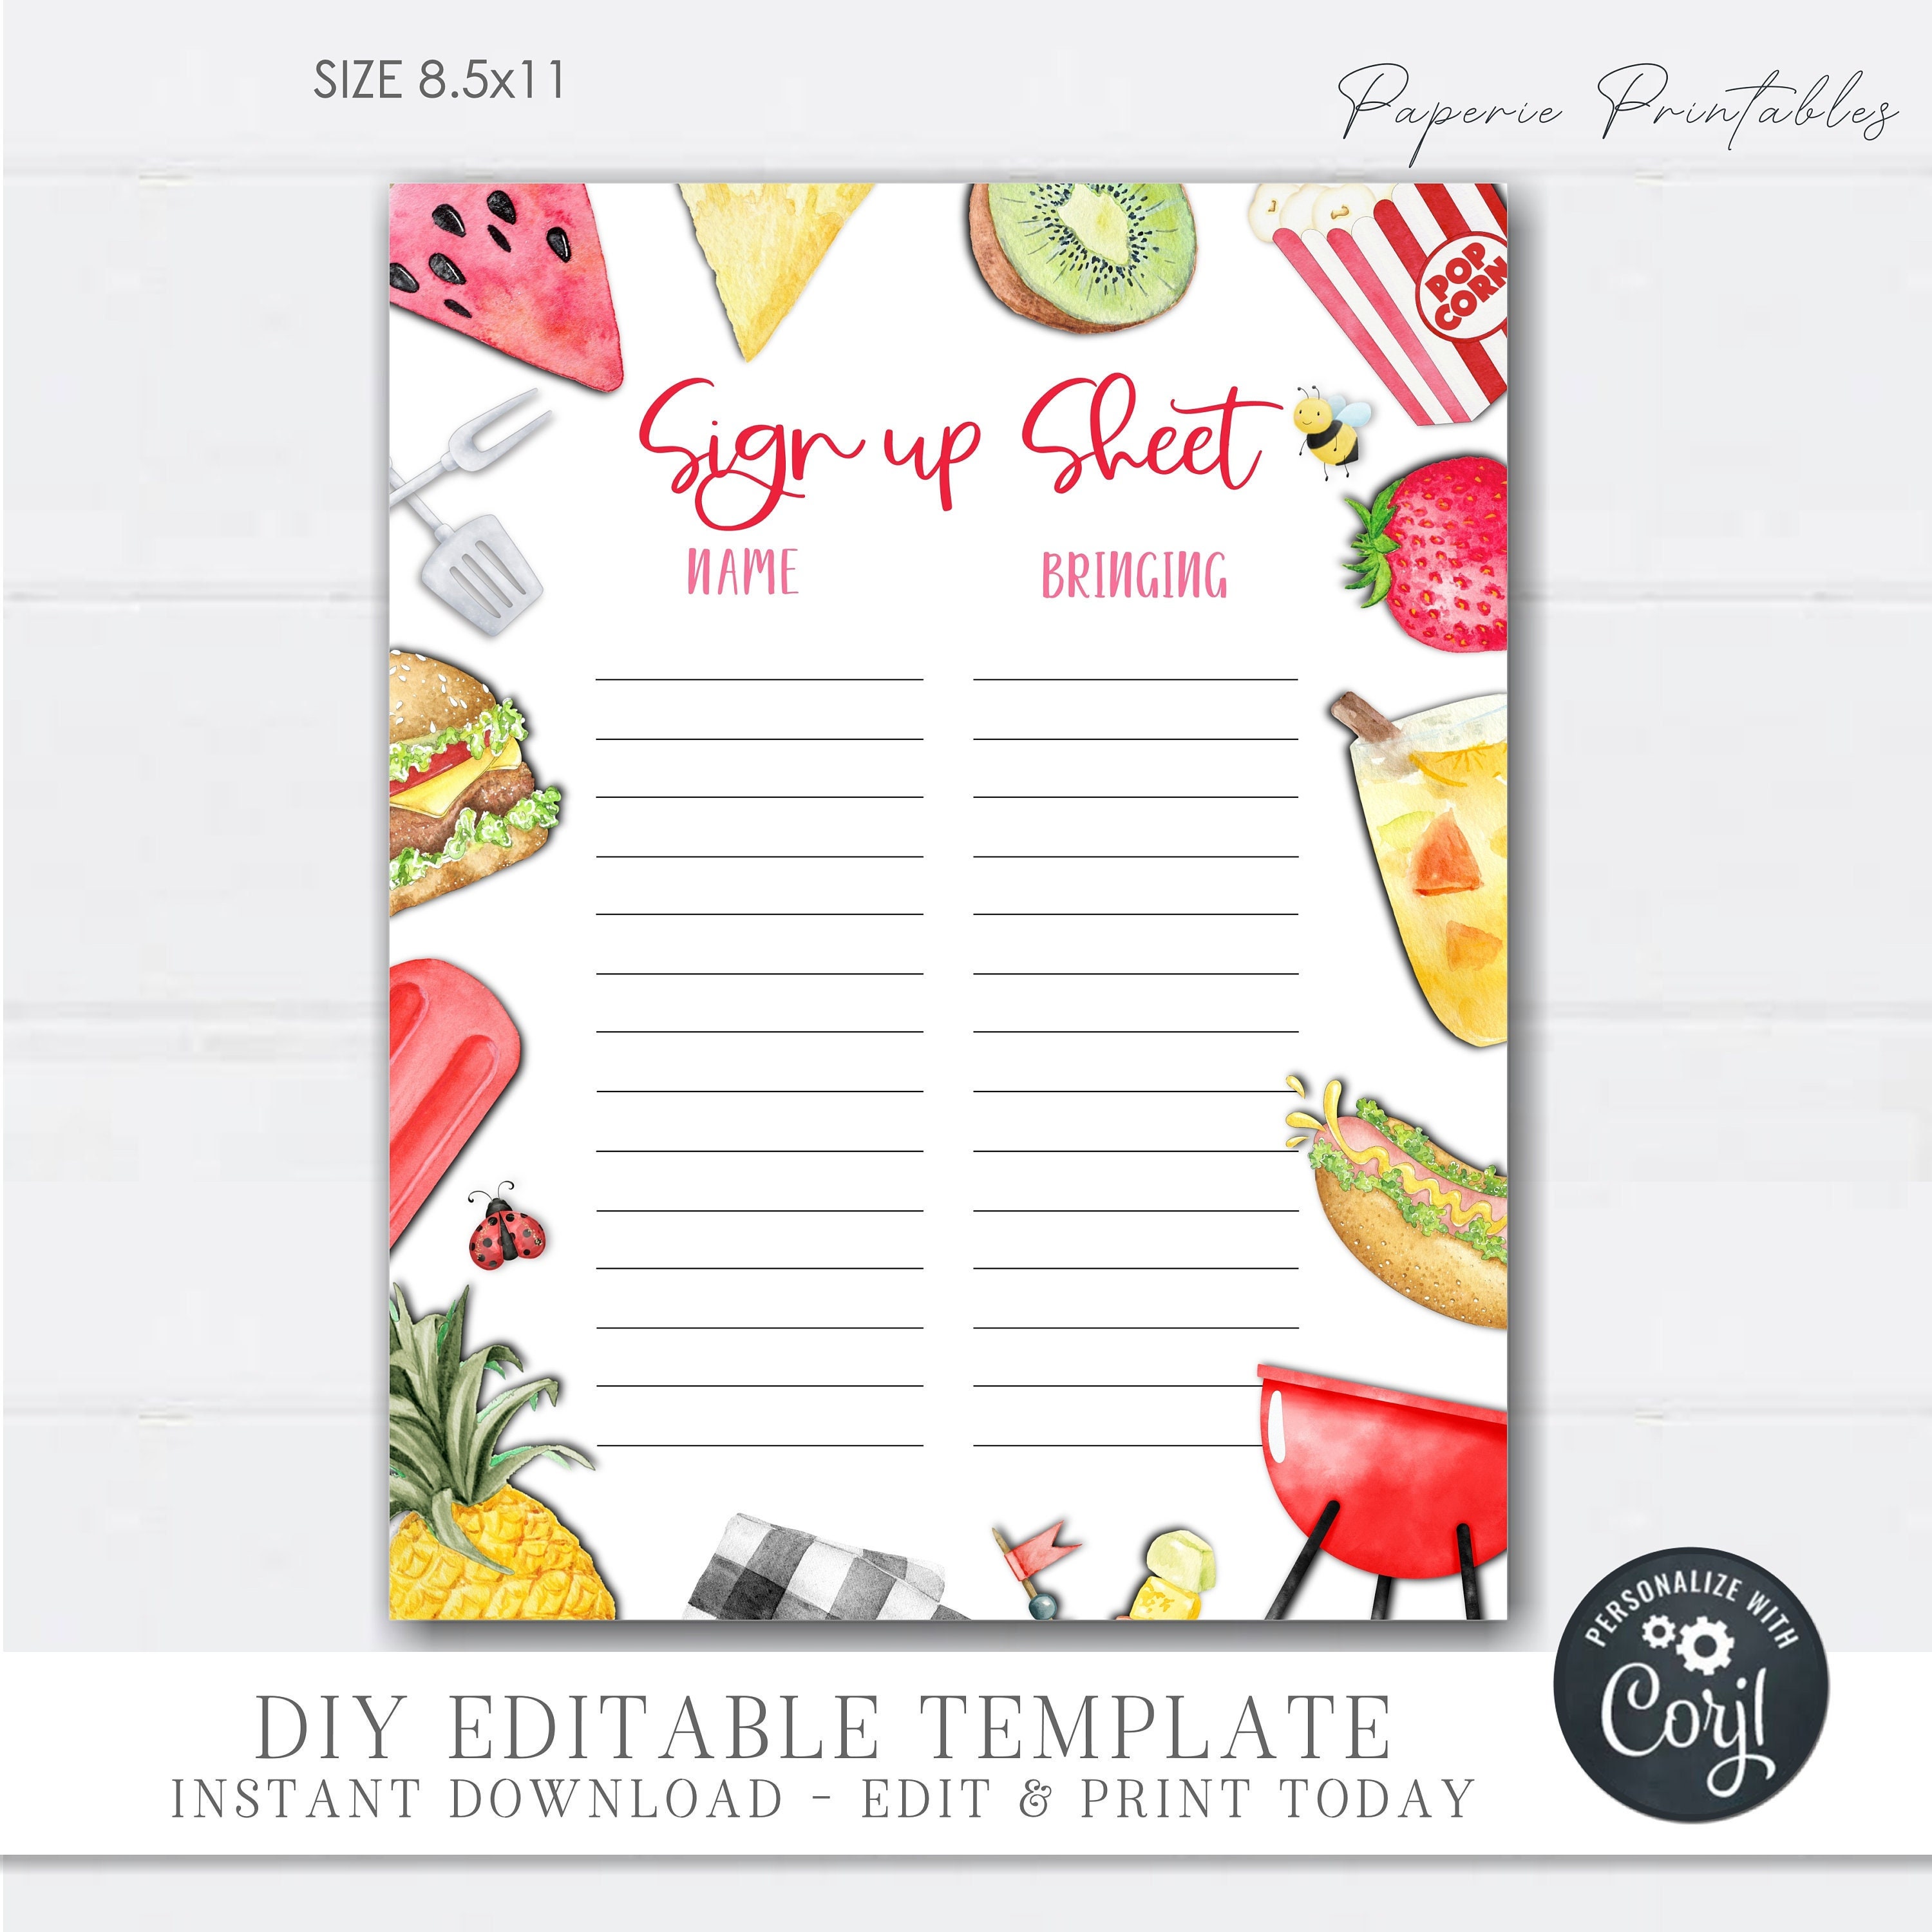 16-best-printable-potluck-sign-up-sheet-templates-holiday-party-pdf